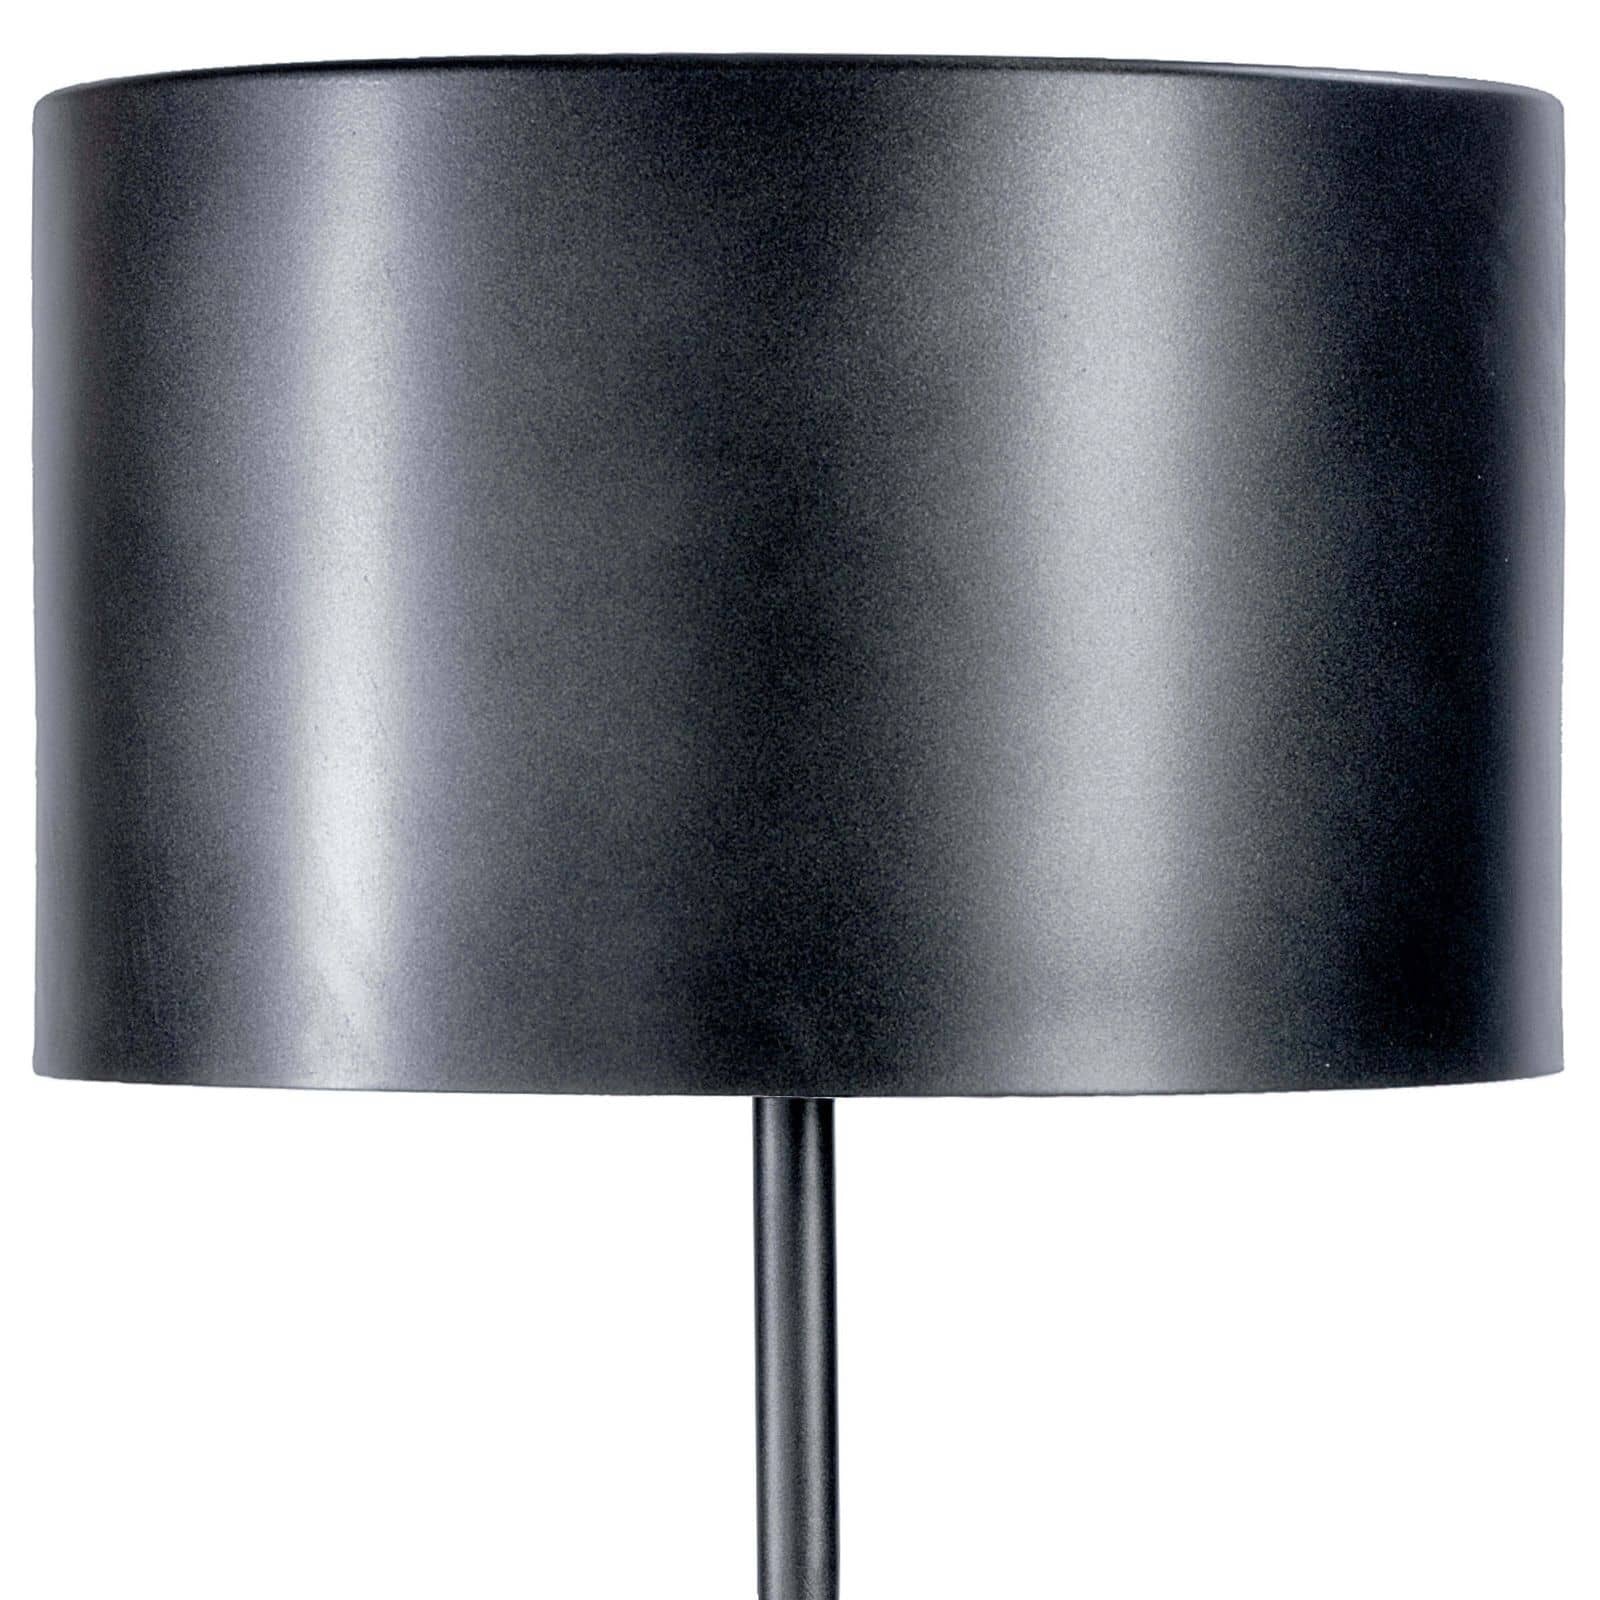 Blending grace and power, the Trilogy Table Lamp uses a tapered base with coordinating shade to provide a versatile solution for your living room, bedroom or entryway. Perfect for those who love minimalist decor or an urban feel to their interiors.   Overall Dimensions: 15.25"w x 15.25"d x 30.5"h